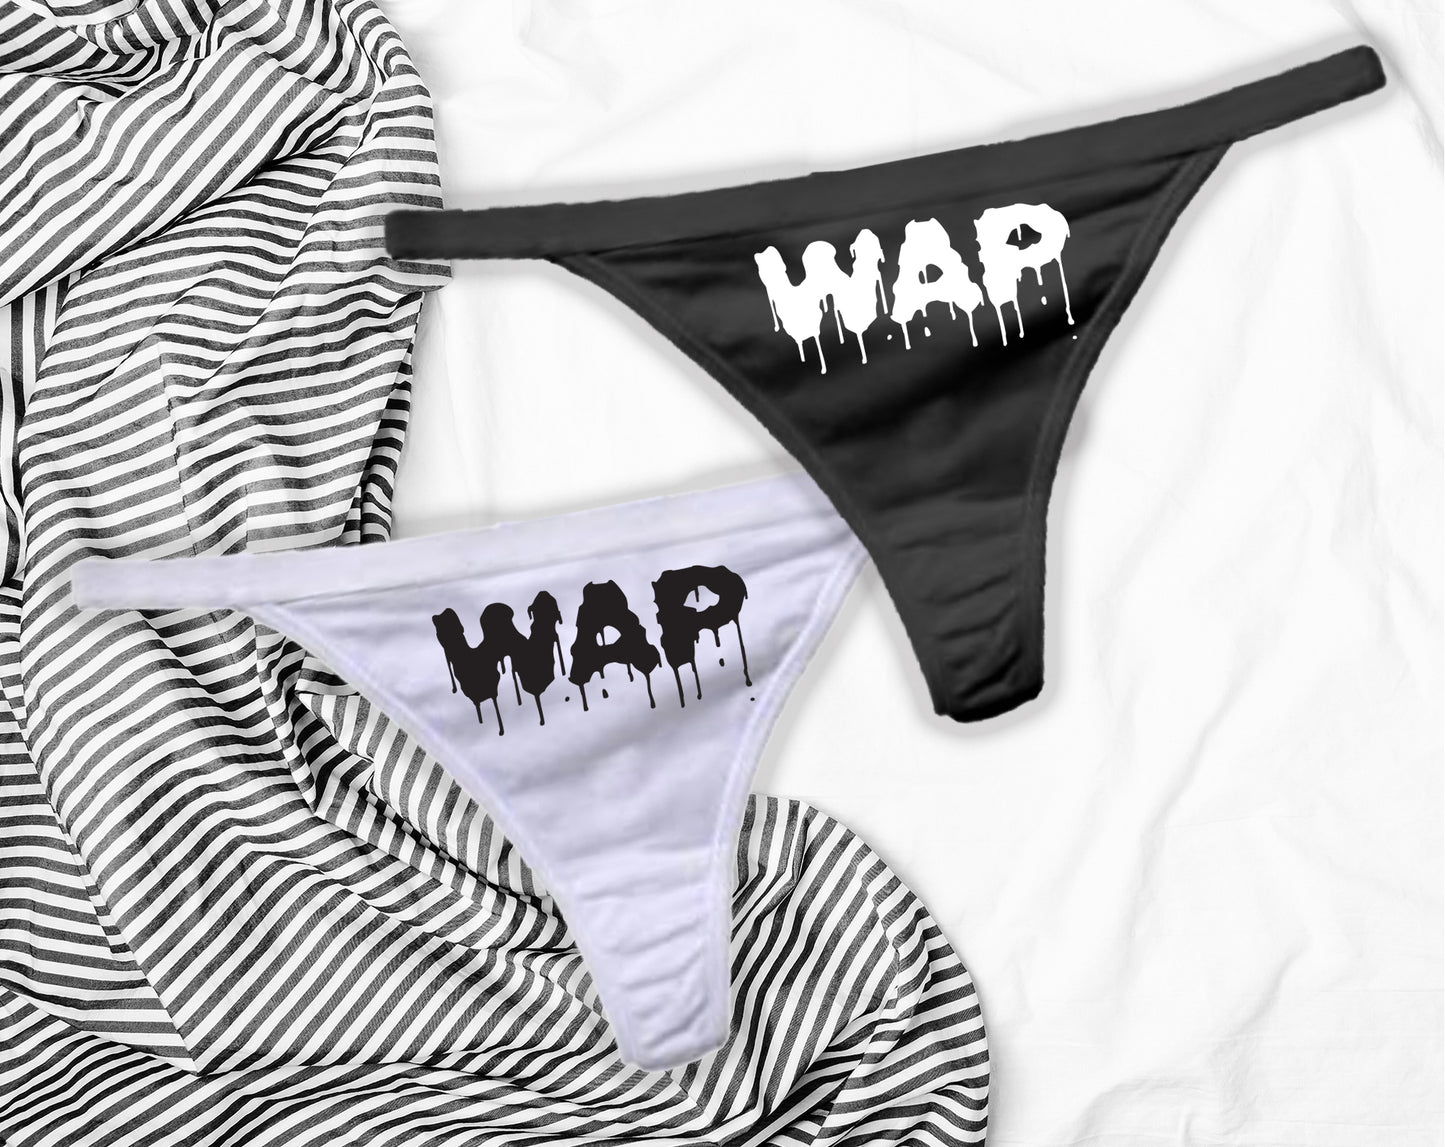 Two pairs of panties - one white and one black with WAP in dripping vinyl on the front